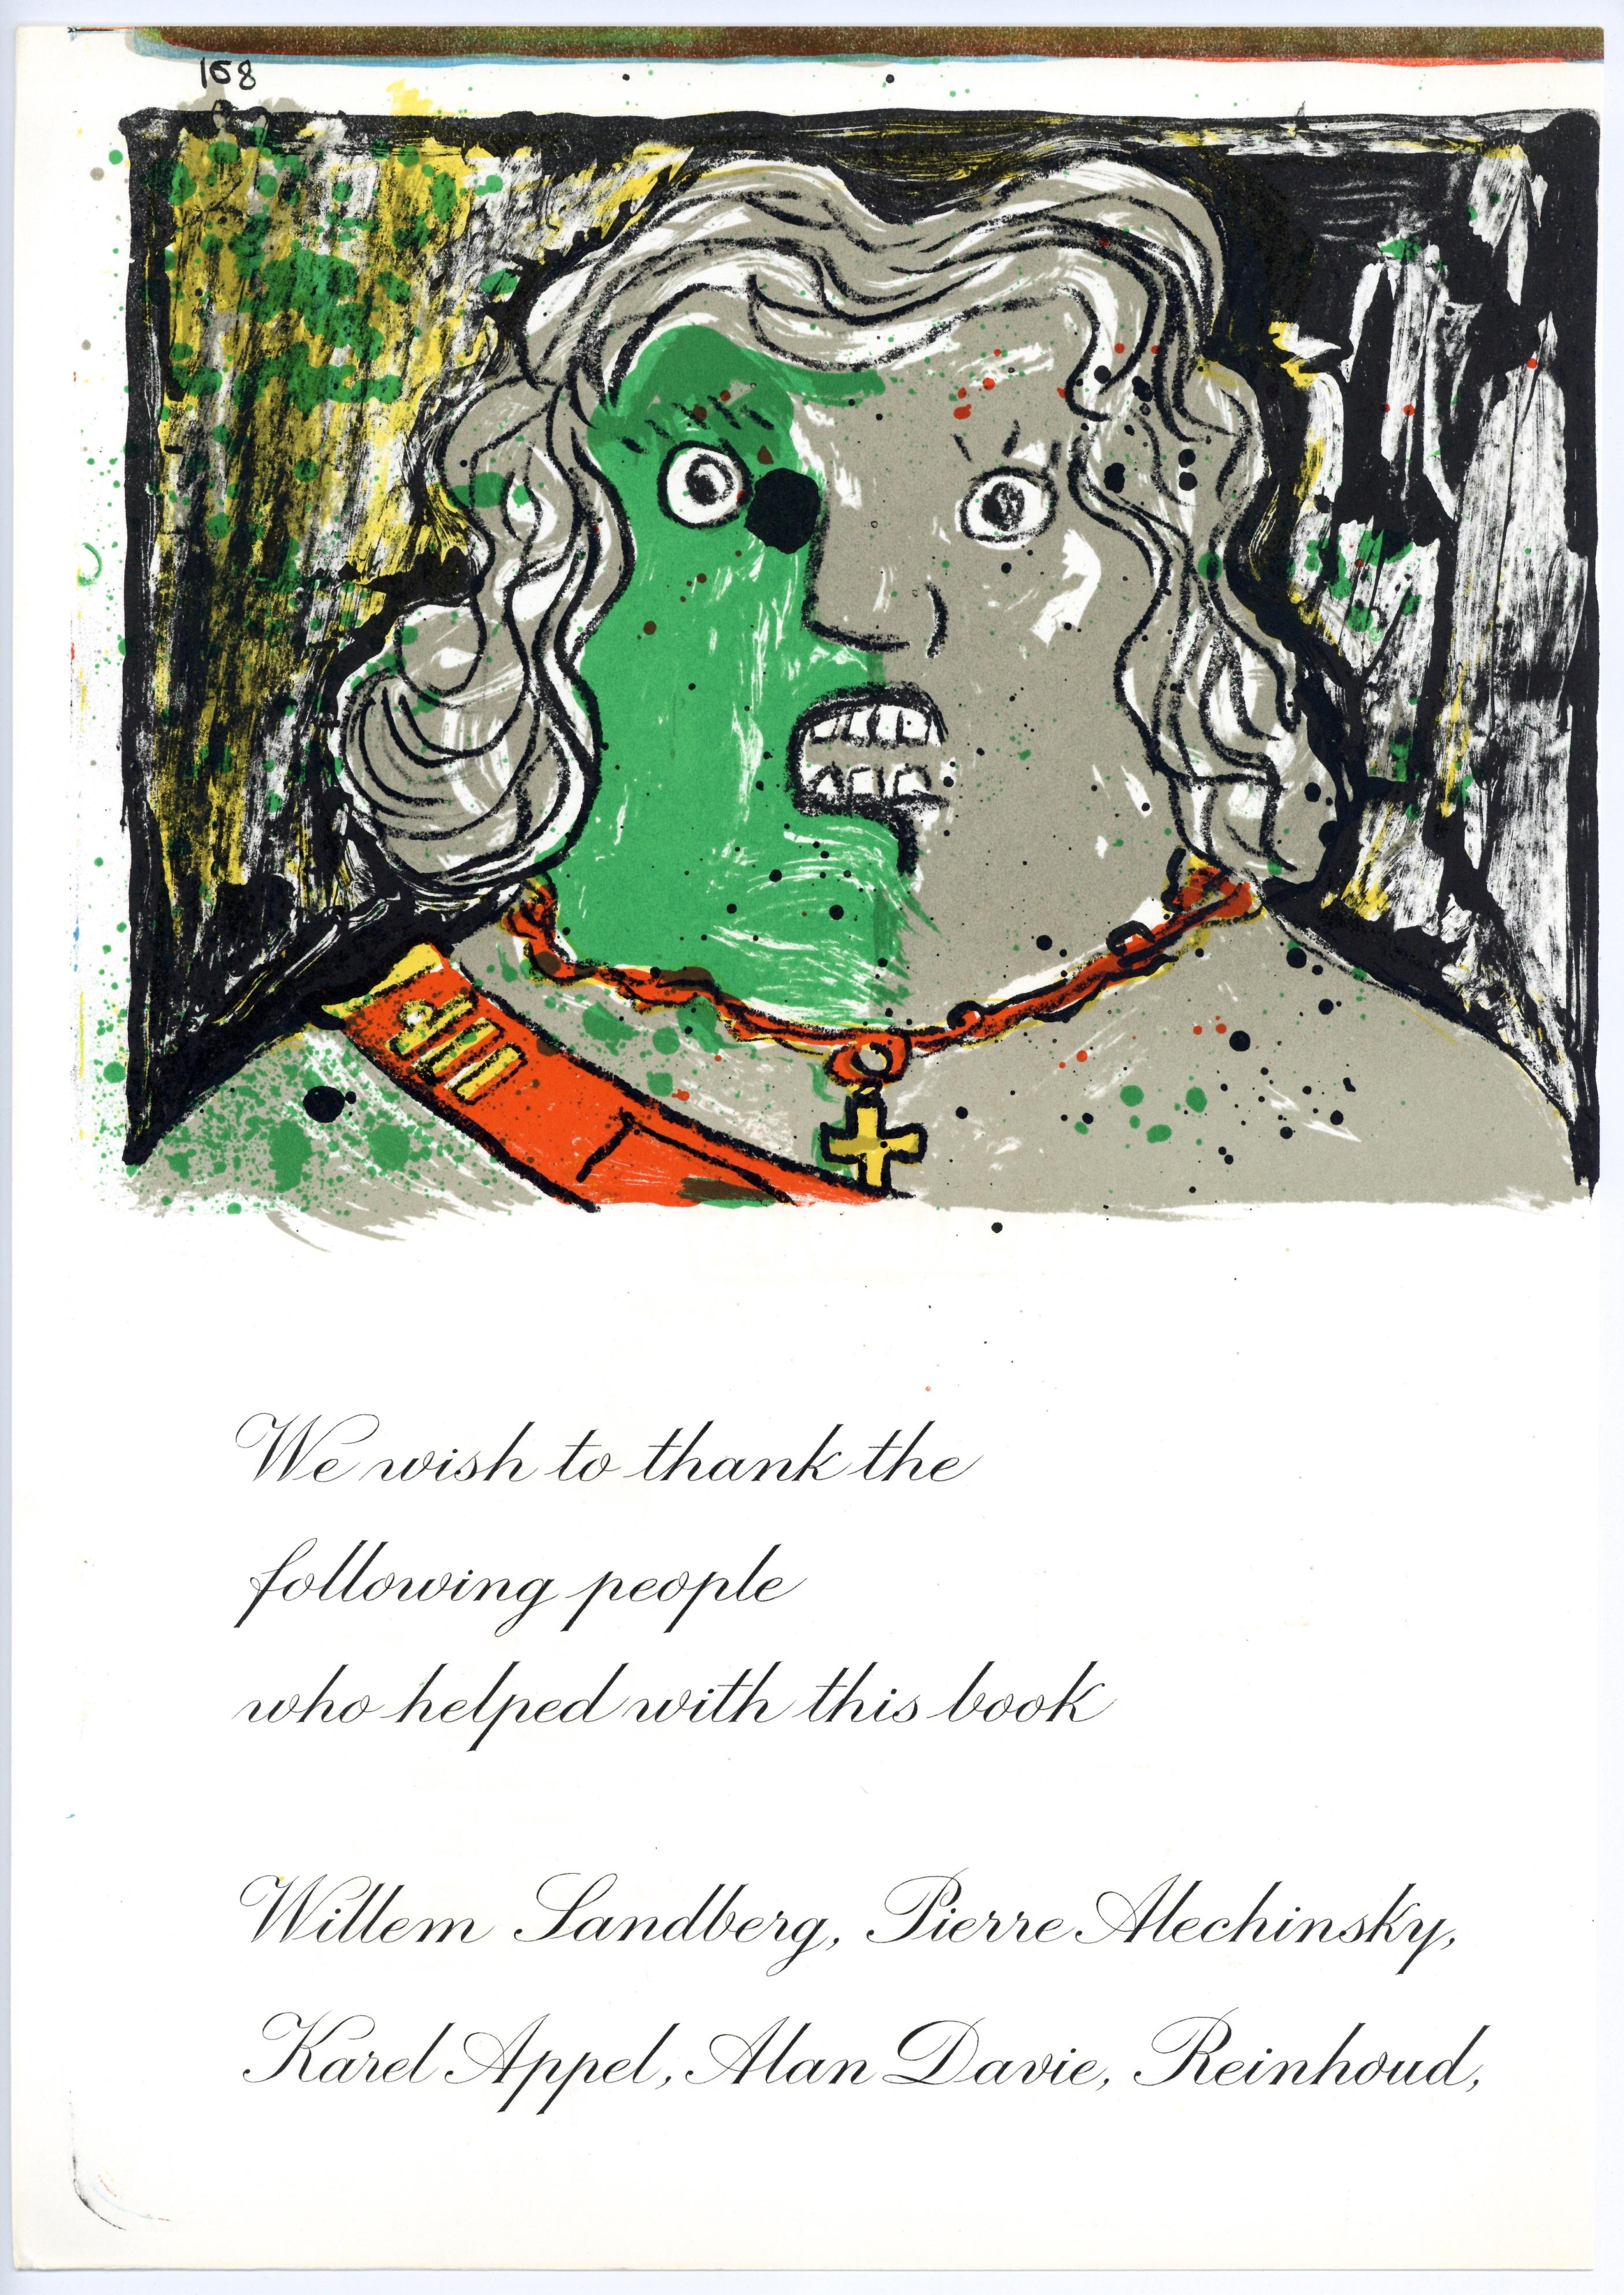 Medium: original lithograph. Printed in 1964 and published by Eberhard Kornfeld for the 1 Cent Life portfolio in an edition of 2000. Sheet size: 16 1/4 x 11 1/2 inches (408 x 290 mm). Image size: 8 x 11 inches. There is poetry text (composed by